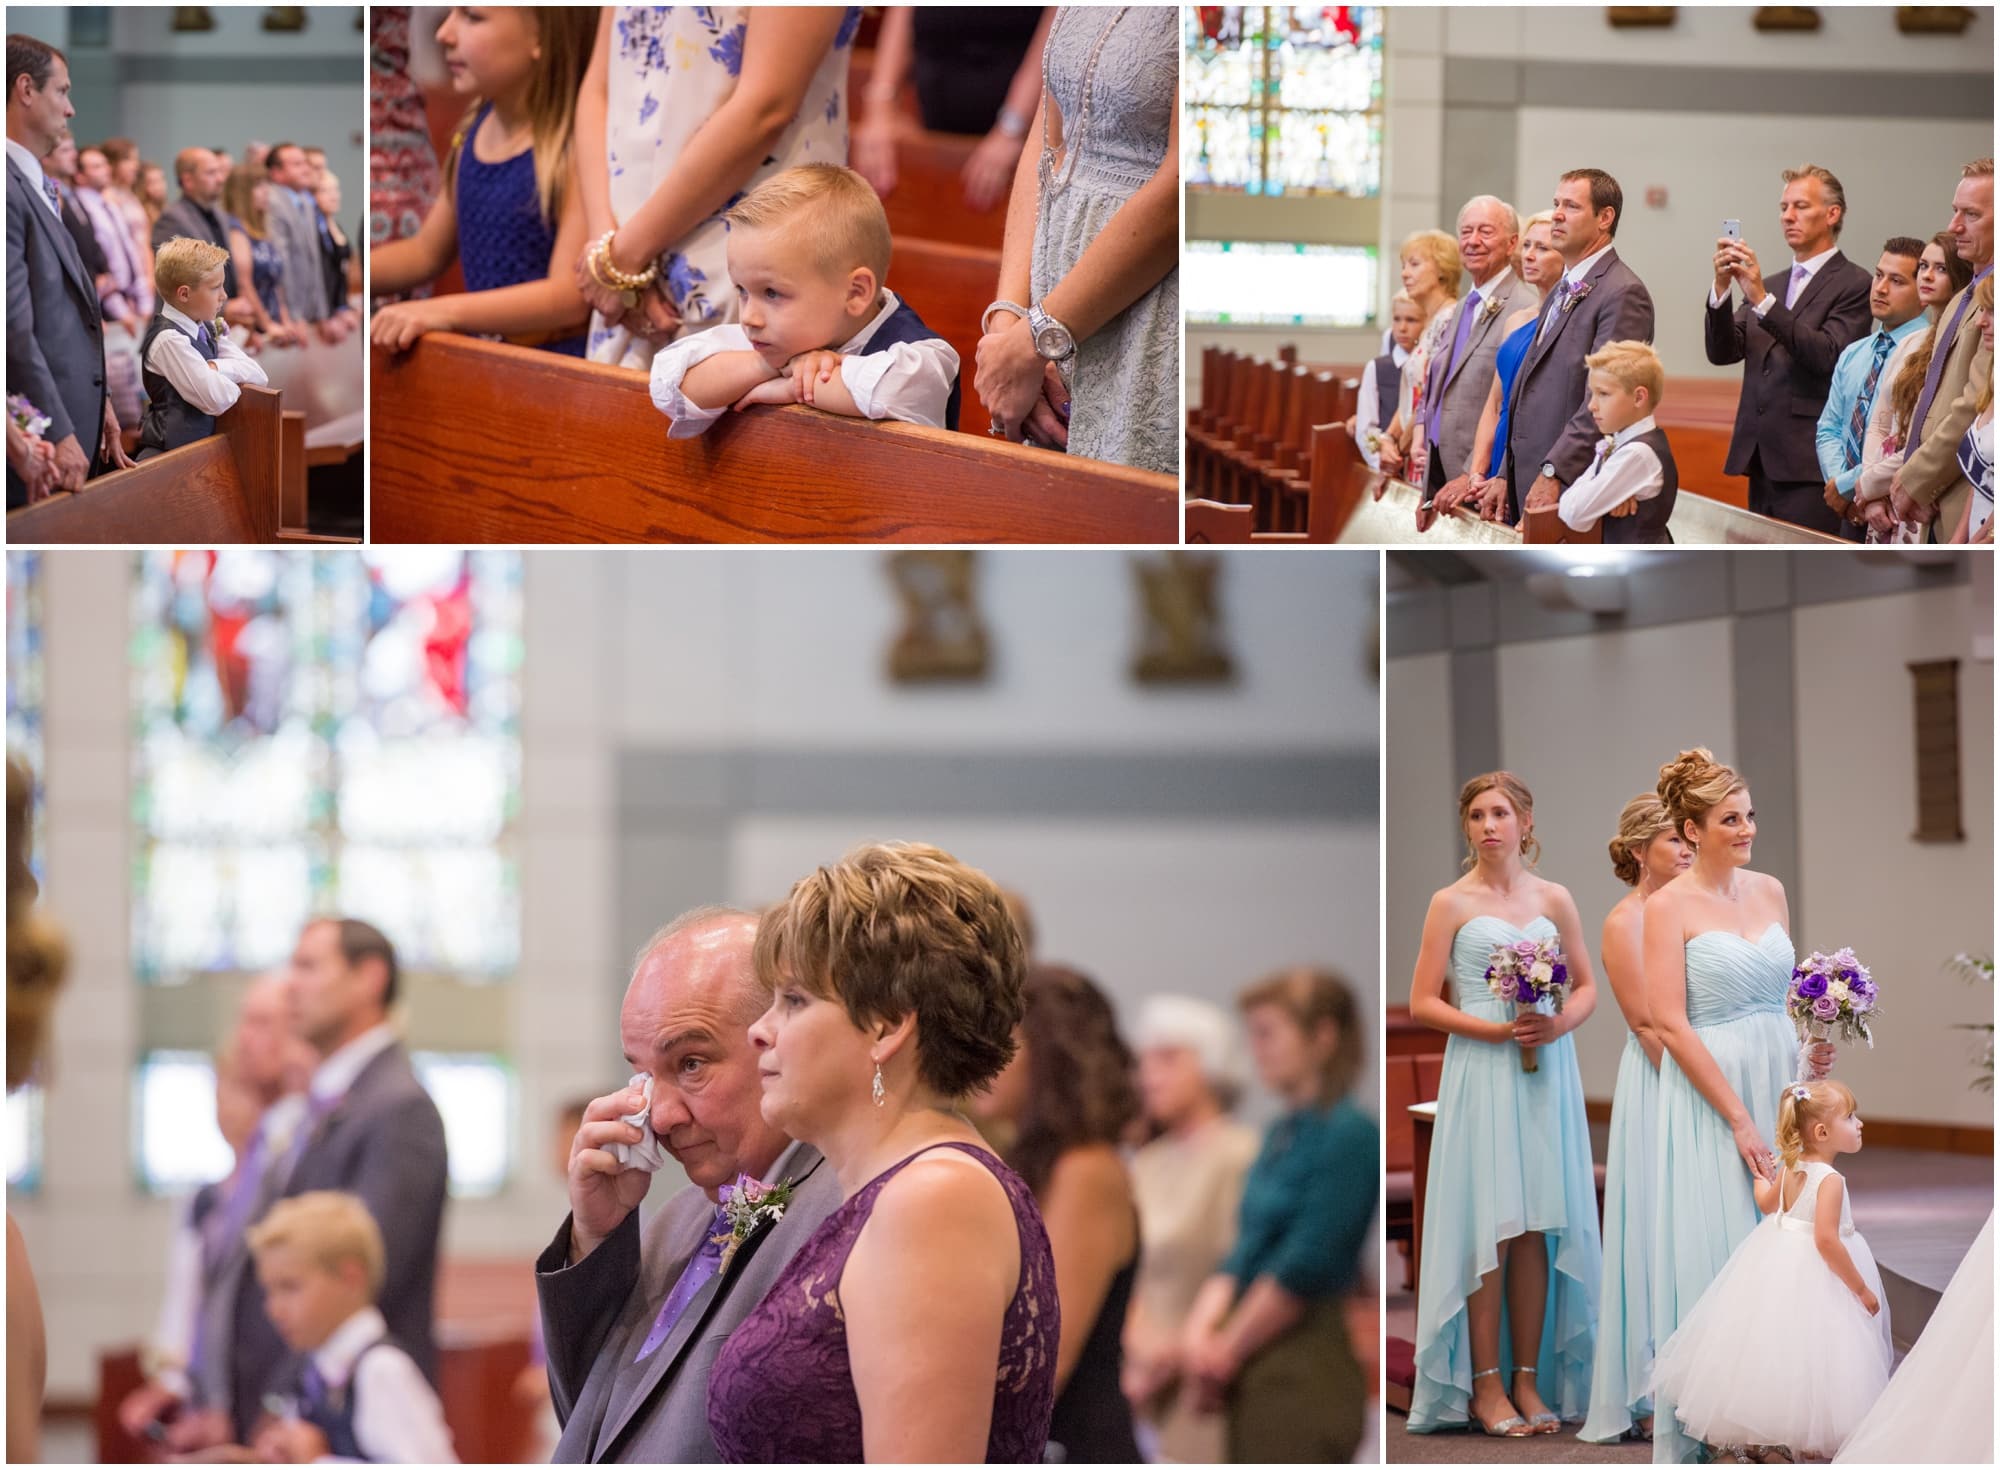 County Line Orchard Wedding Photographer captured moments of family watching bride and groom get married